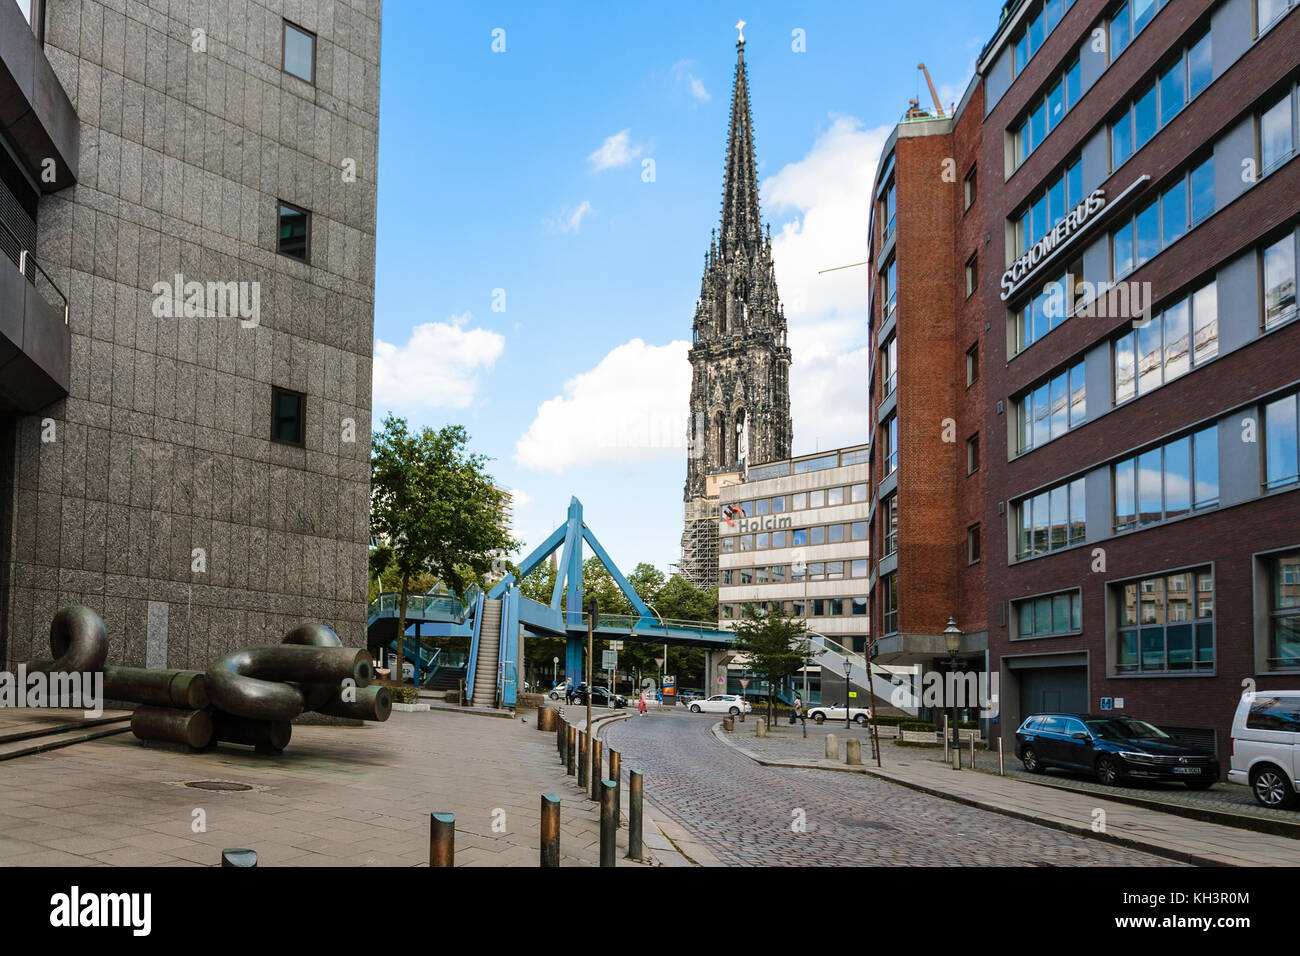 HAMBURG, GERMANY - SEPTEMBER 15, 2017: Deichstrasse street and view of St Nicholas church. The church was the tallest building in the world in 1874-18 Stock Photo